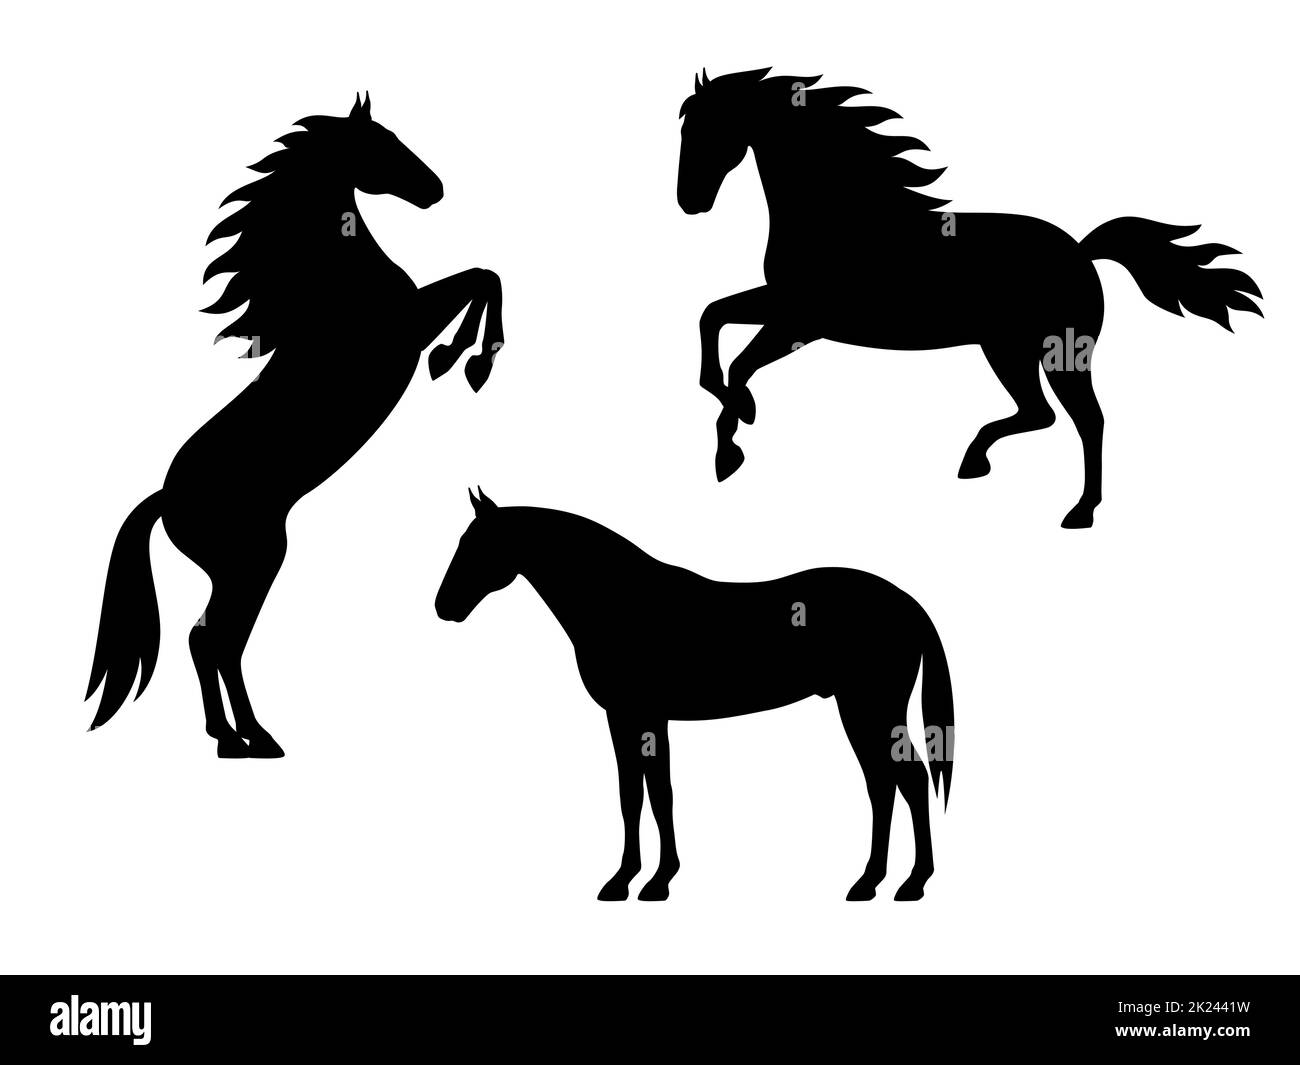 Set of silhouette horses. Vector illustration of black horse silhouette set isolated on white. Logo icon, side view. Stock Vector